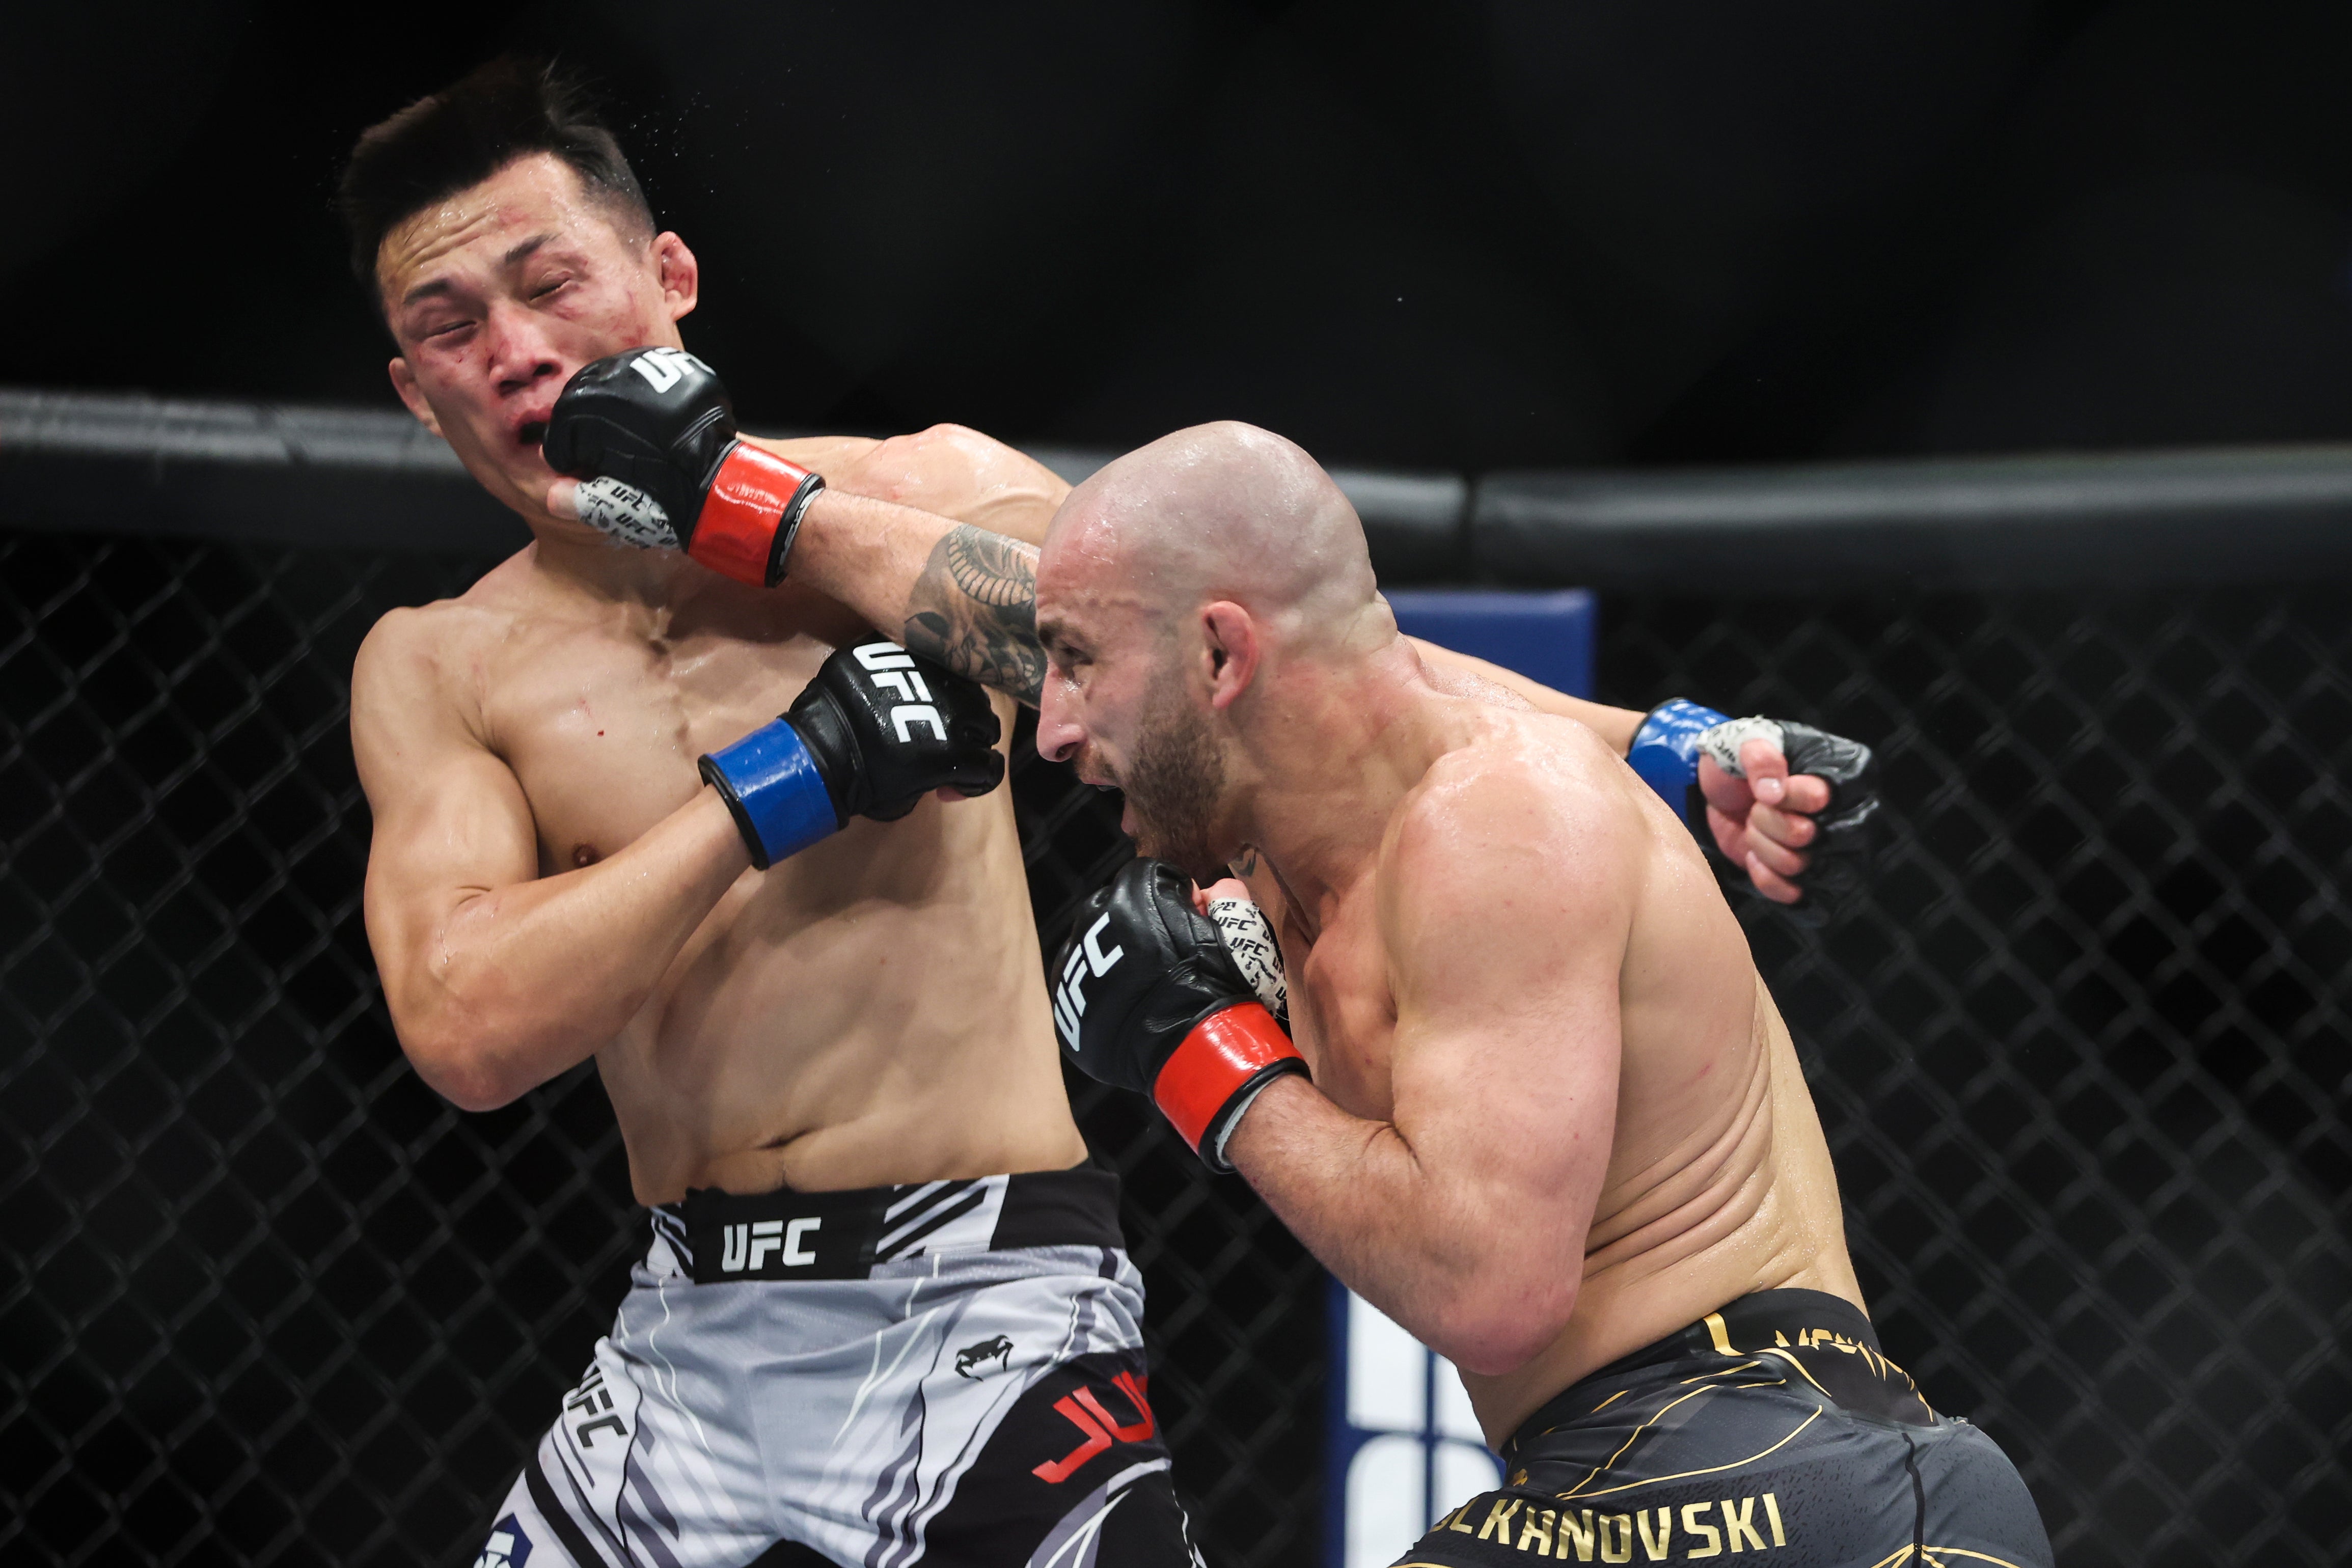 Volkanovski put on a clinic en route to beating Chan Sung Jung via TKO